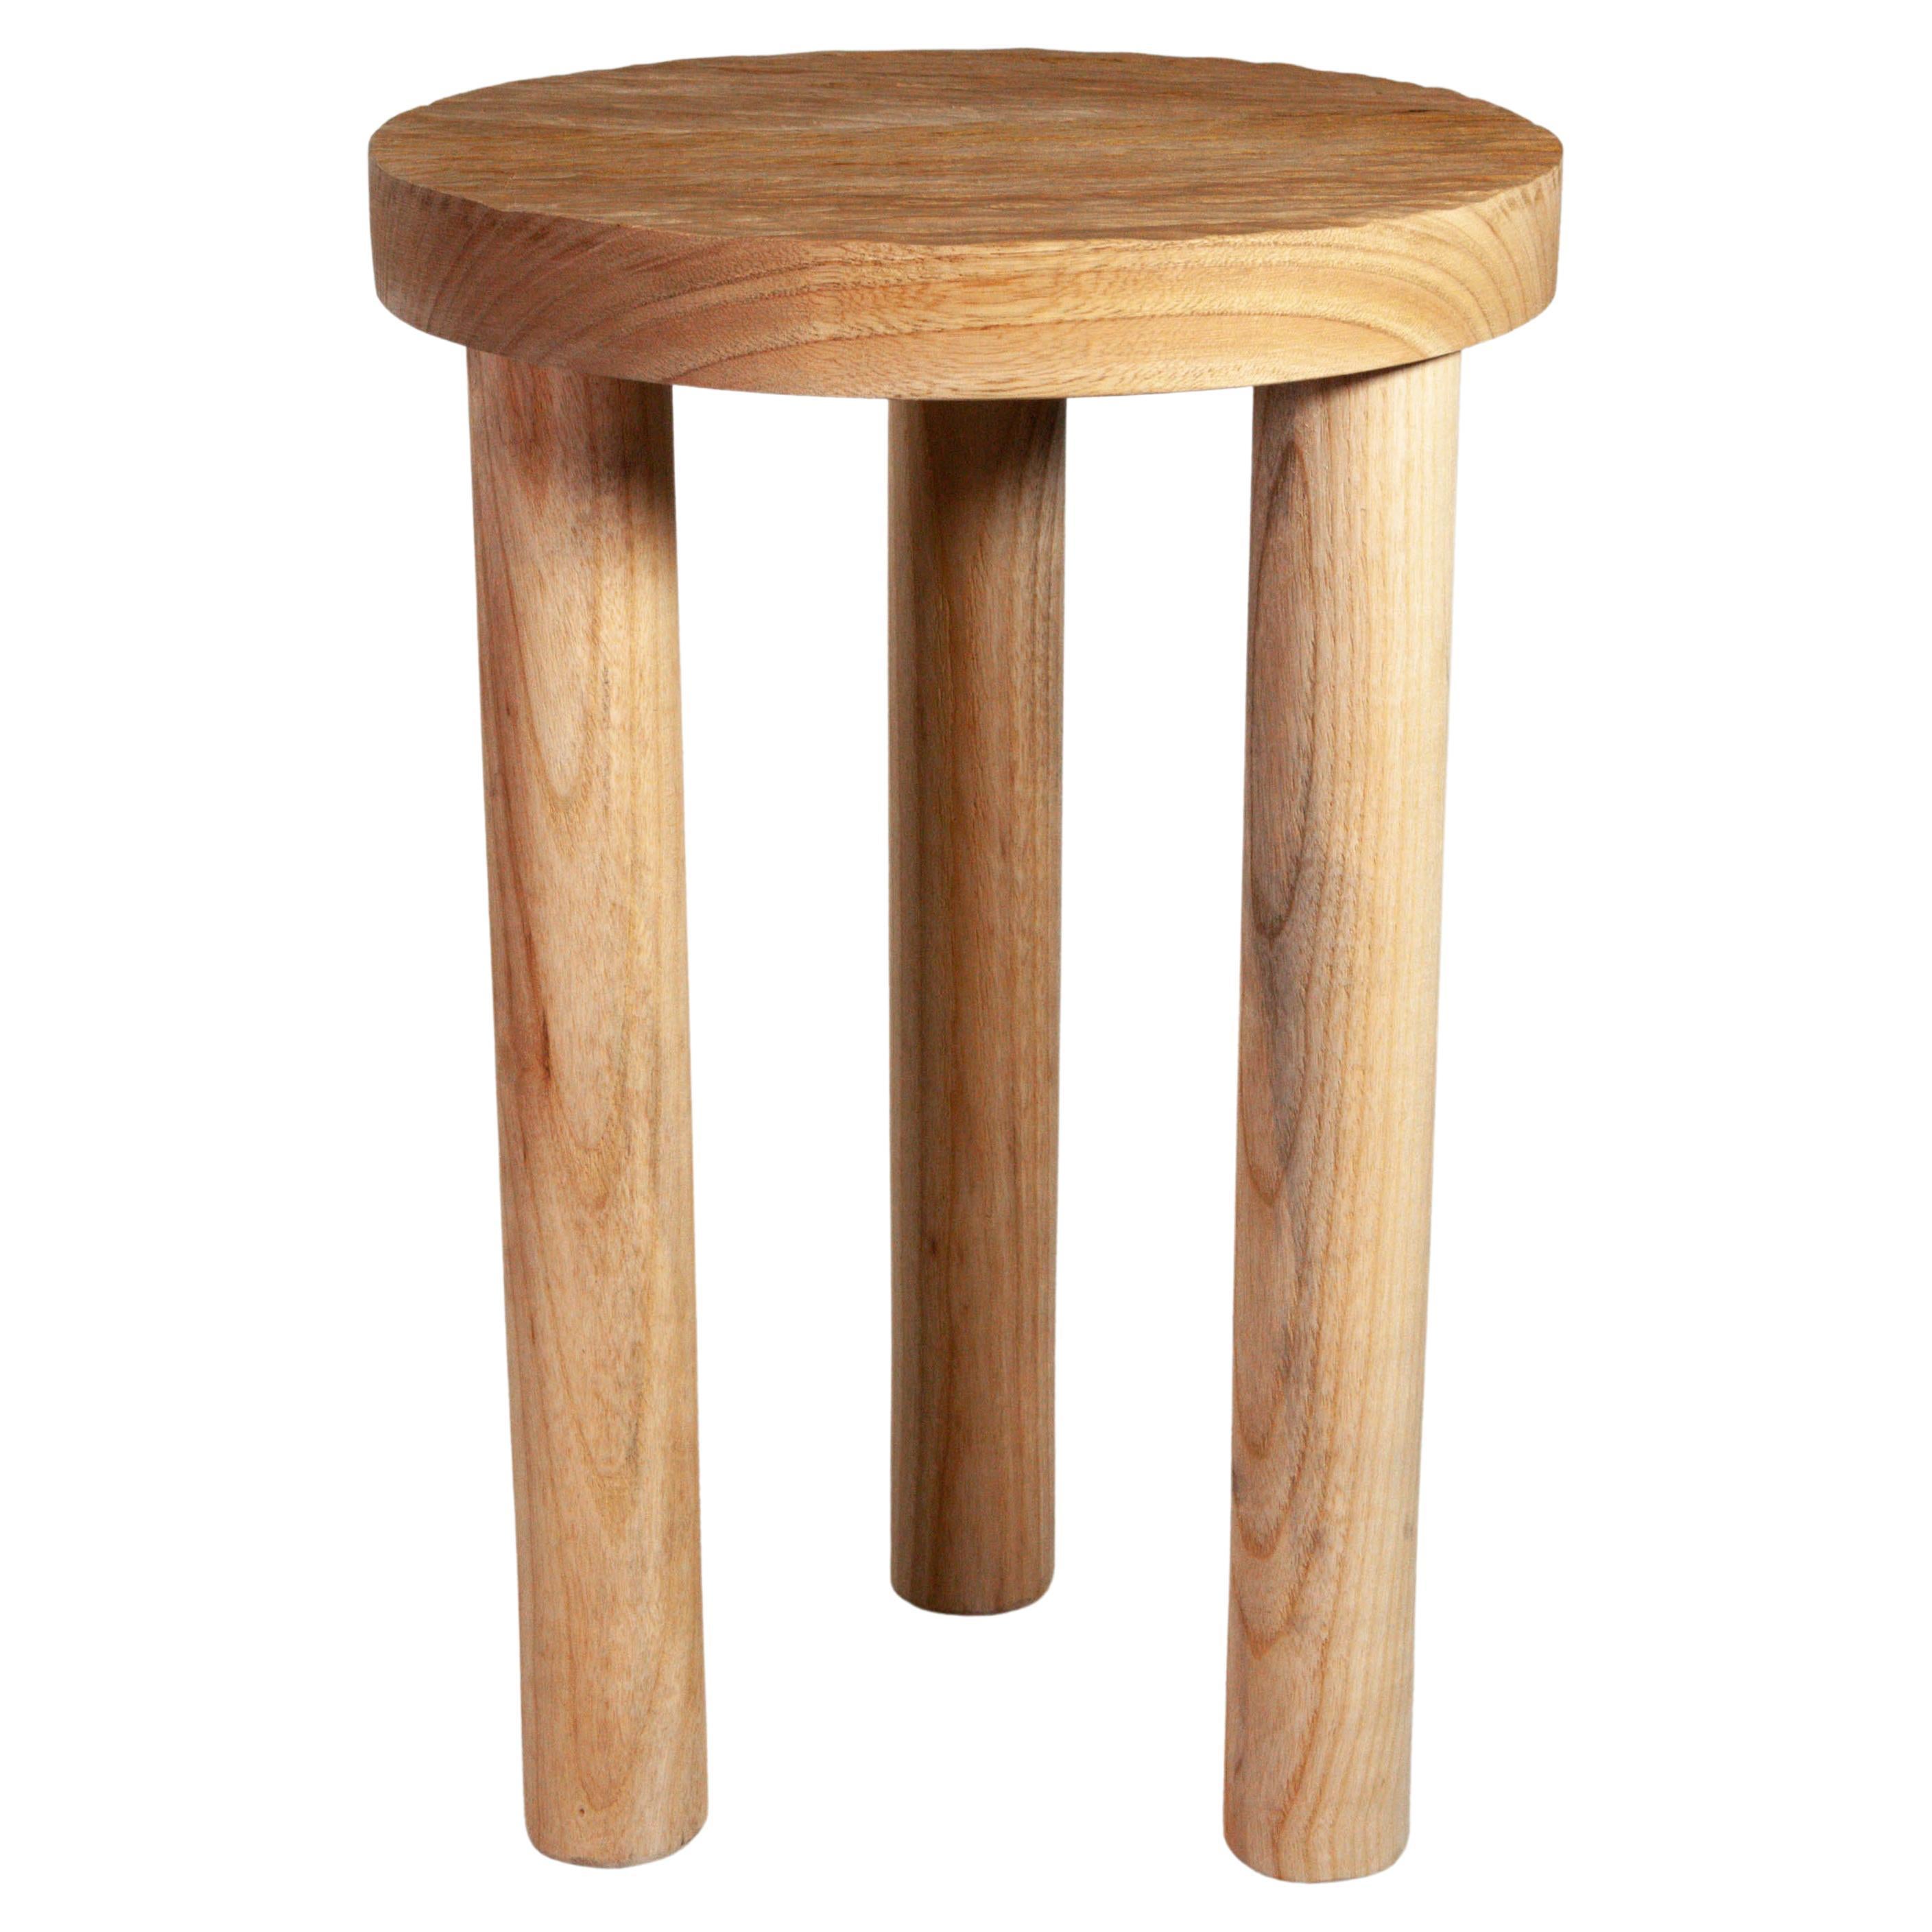 Casa Cubista Hand Carved Solid Wood Stool Portuguese Chestnut Chair Side Table For Sale